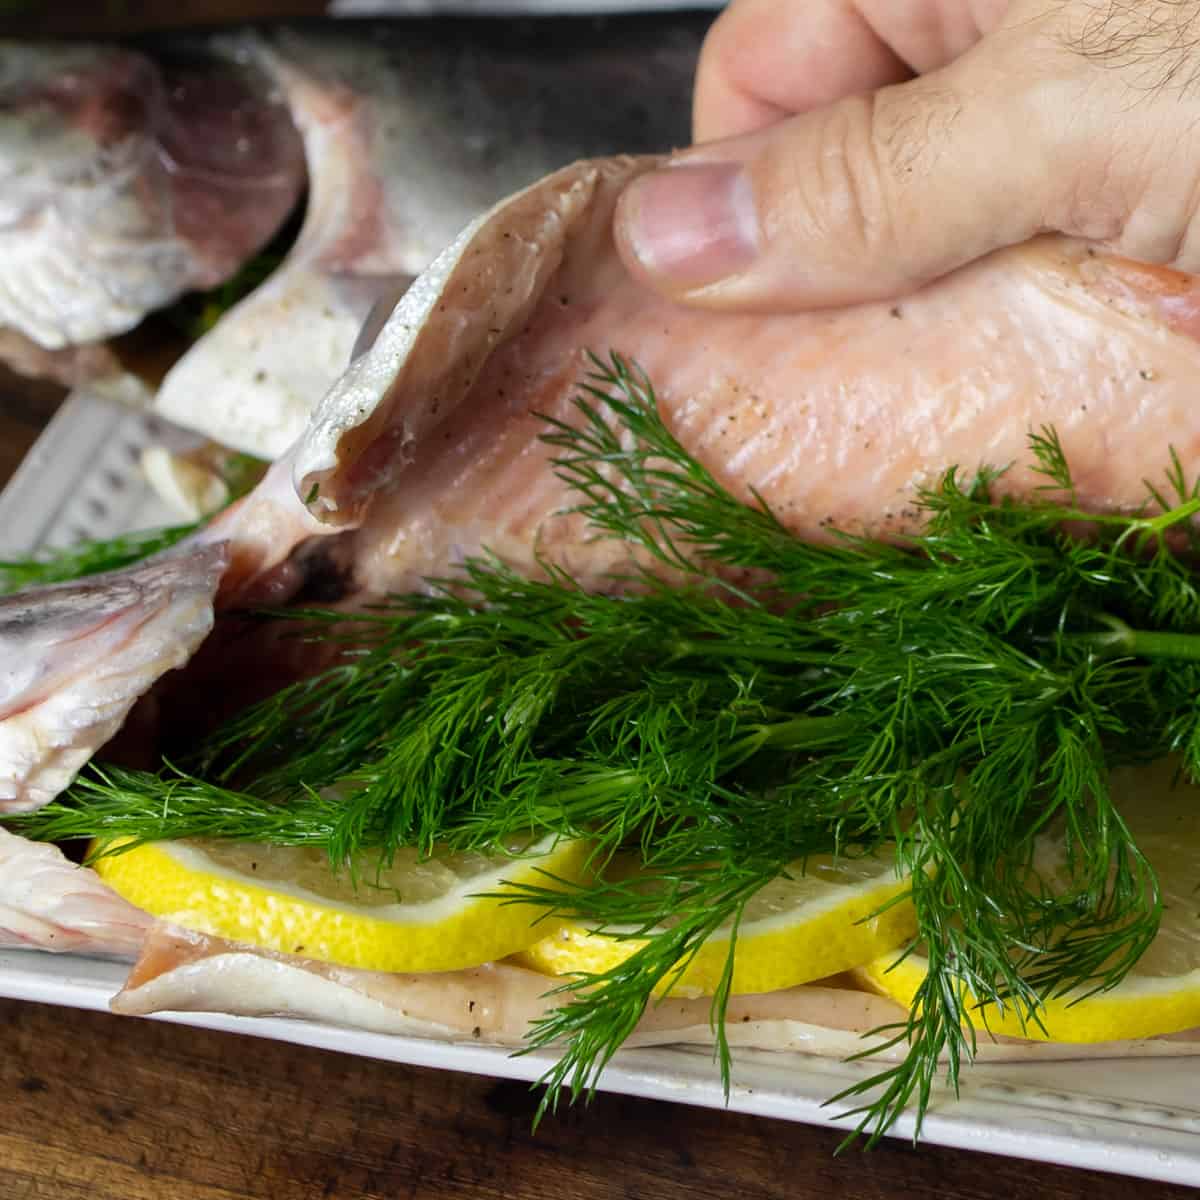 Fresh dill and sliced lemons placed in a cleaned fish.